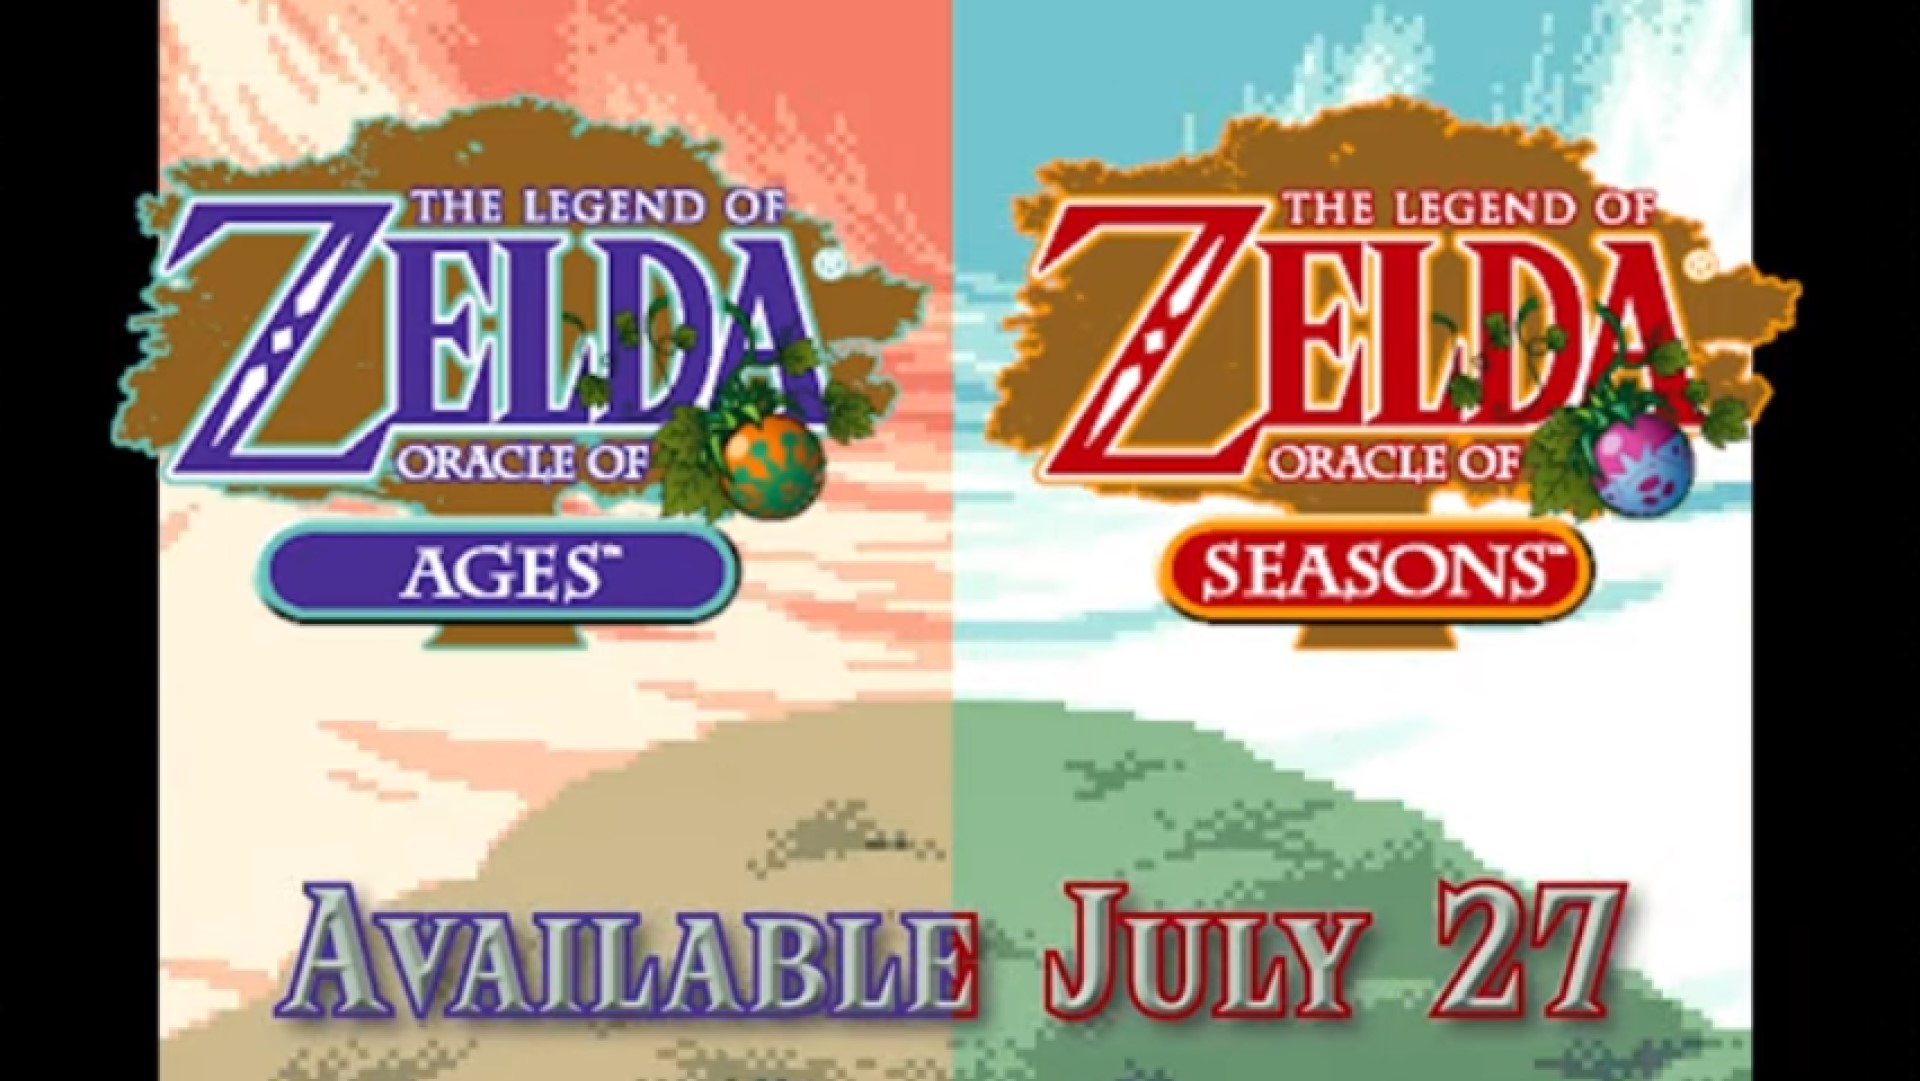 Zelda: Oracle of Ages & Oracle of Seasons Join Switch Online